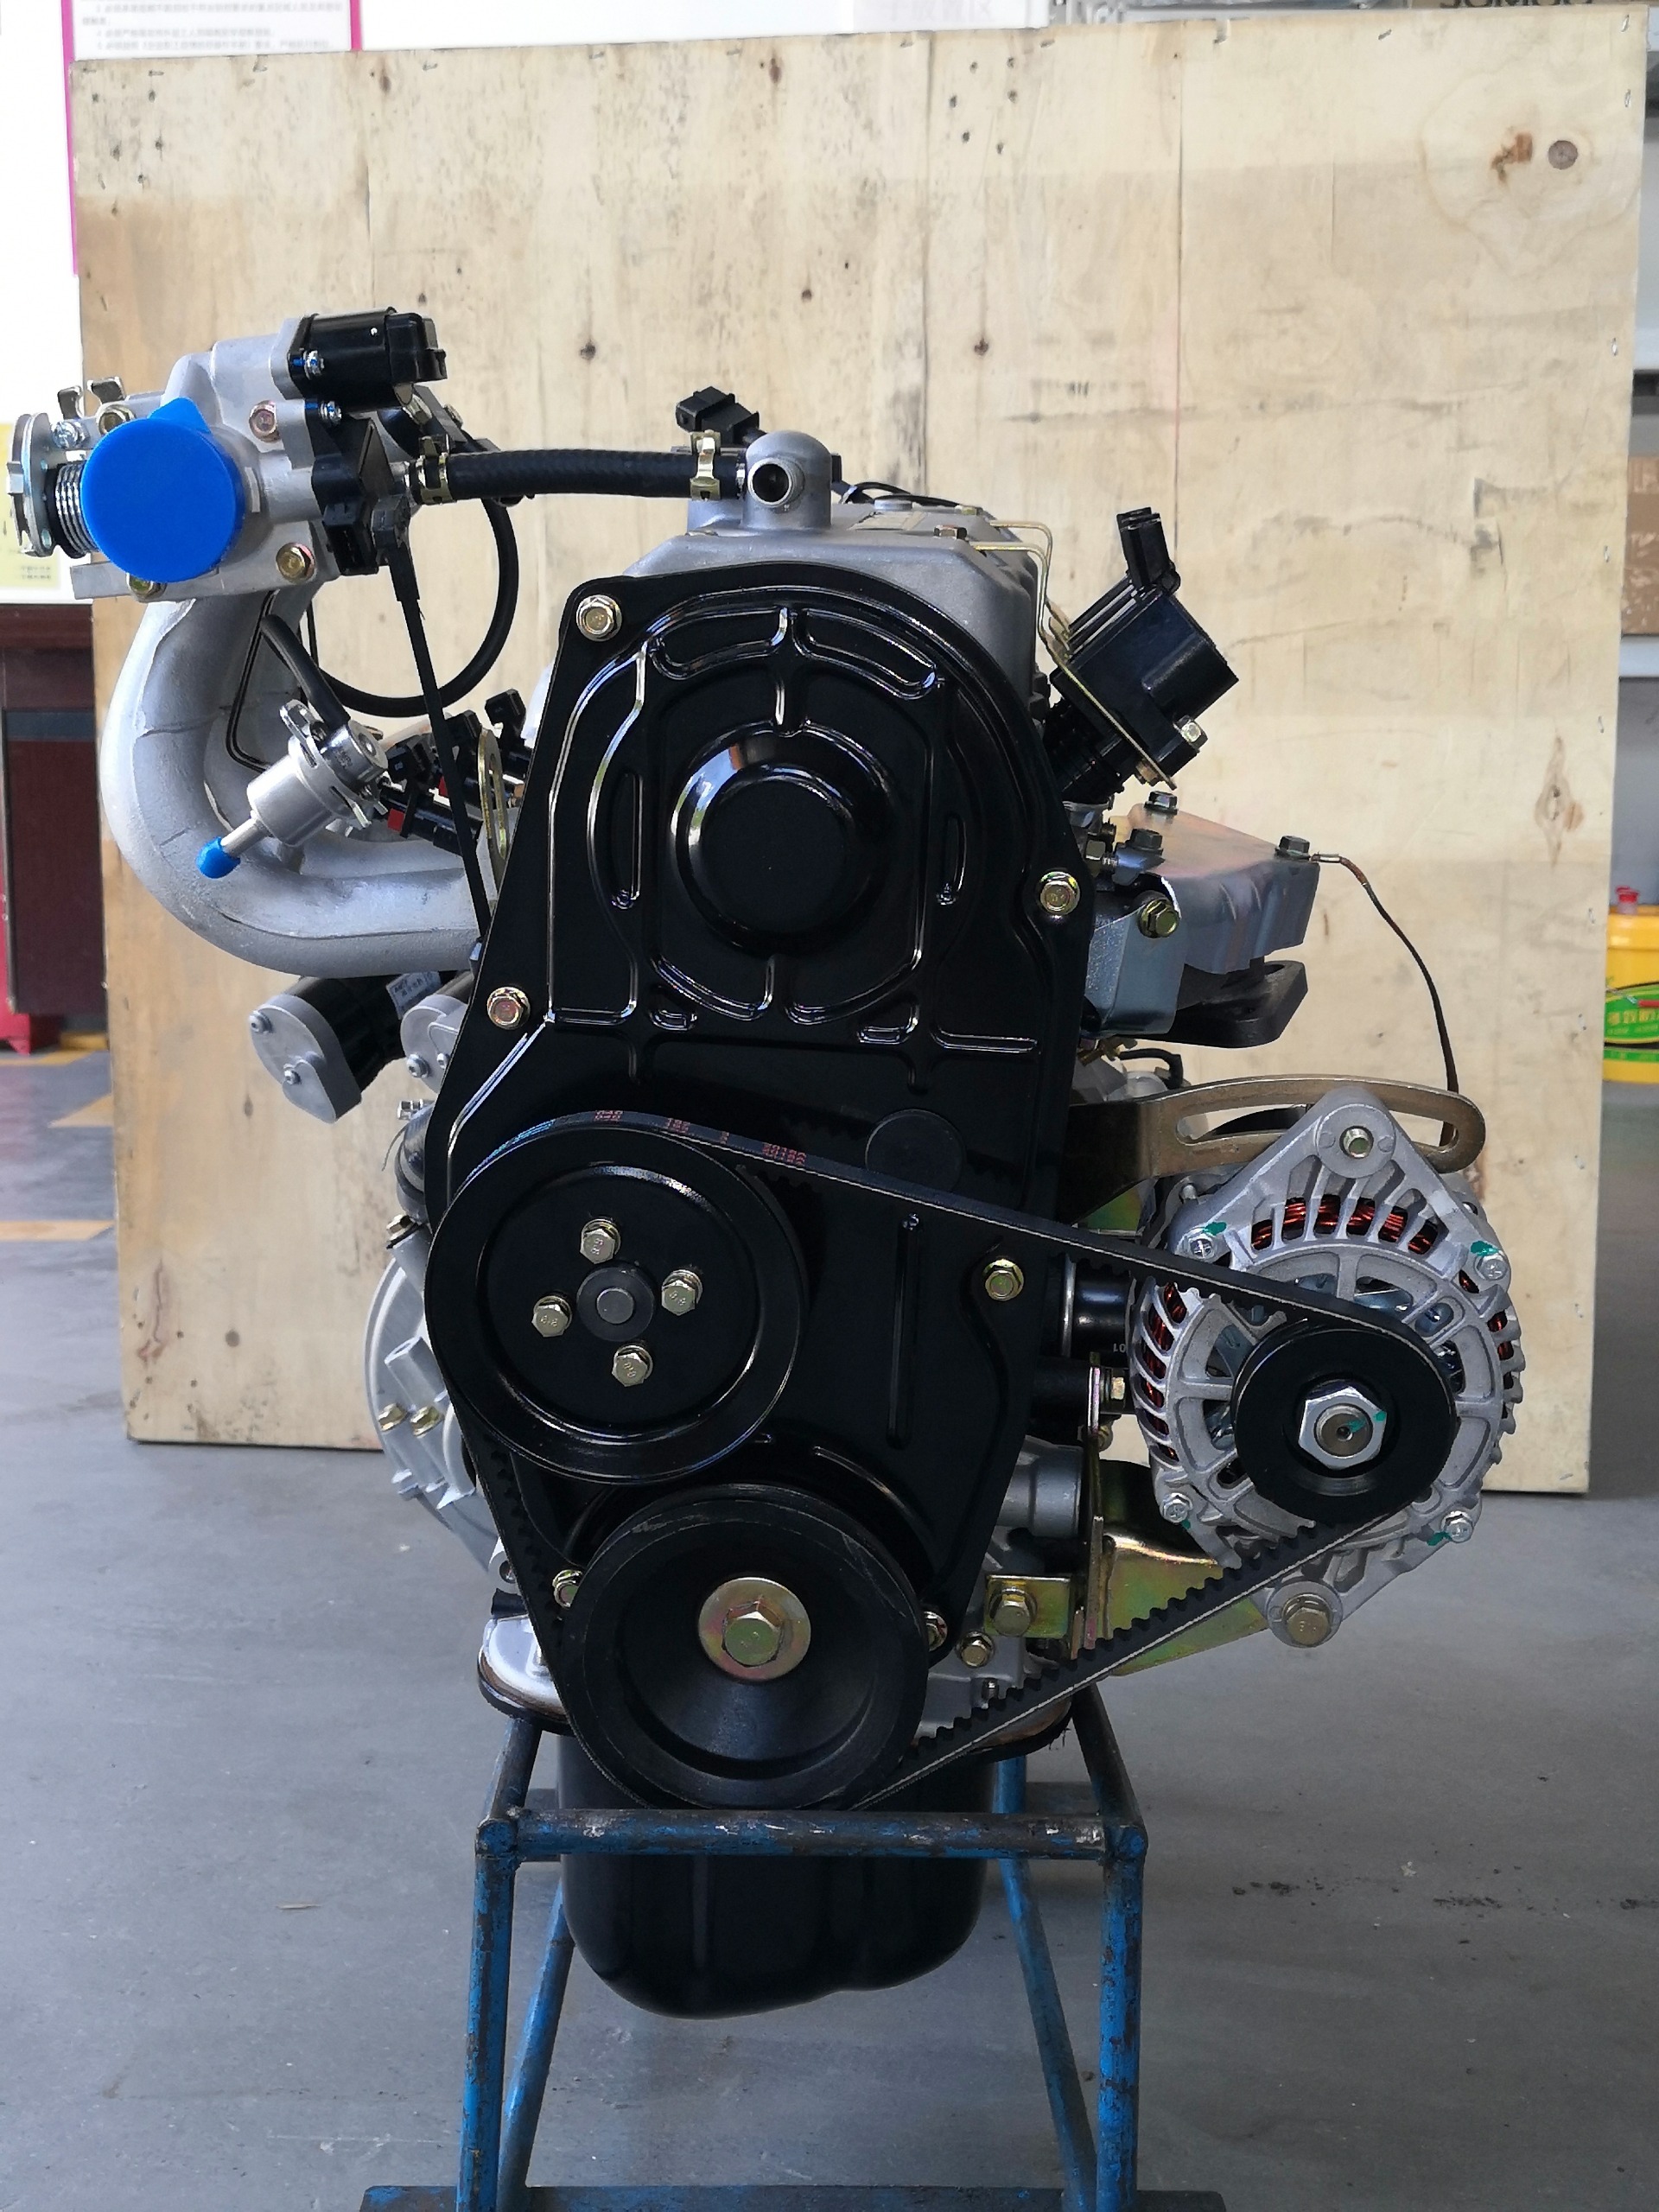 DAYANG Gasoline type Car Engine 465qe 800cc water cooled Engine Assembly Fit For adult Origin Land Word